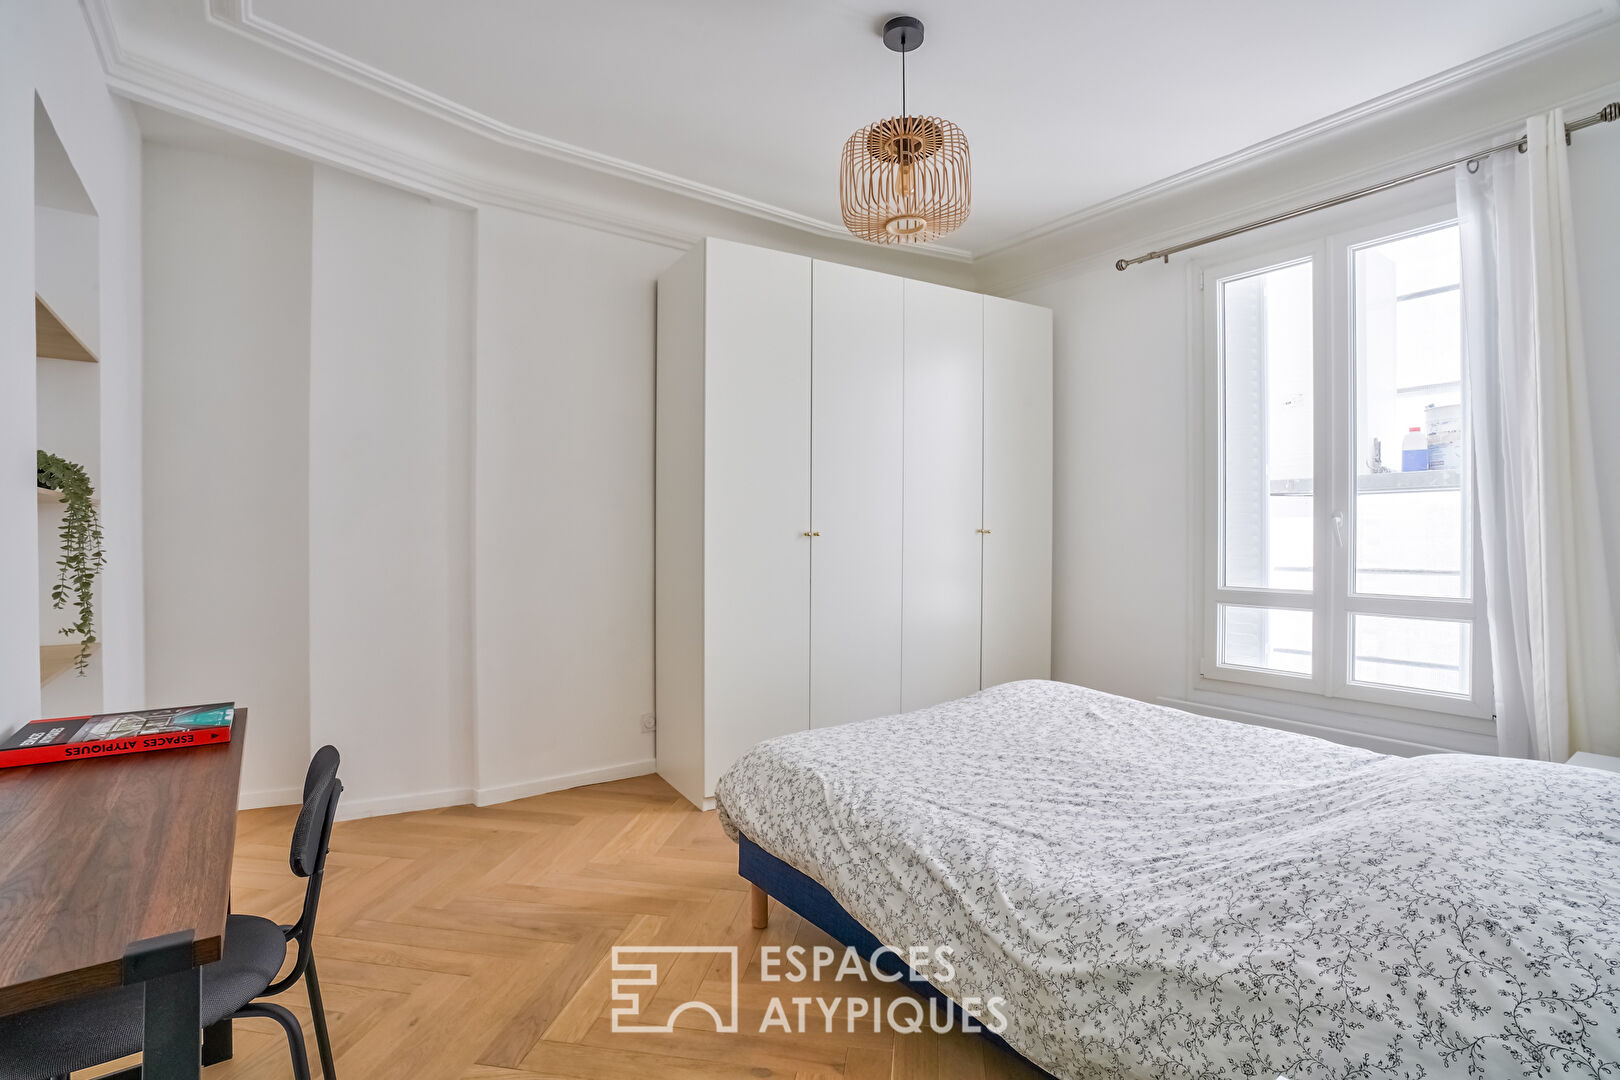 Completely renovated apartment near Courbevoie station